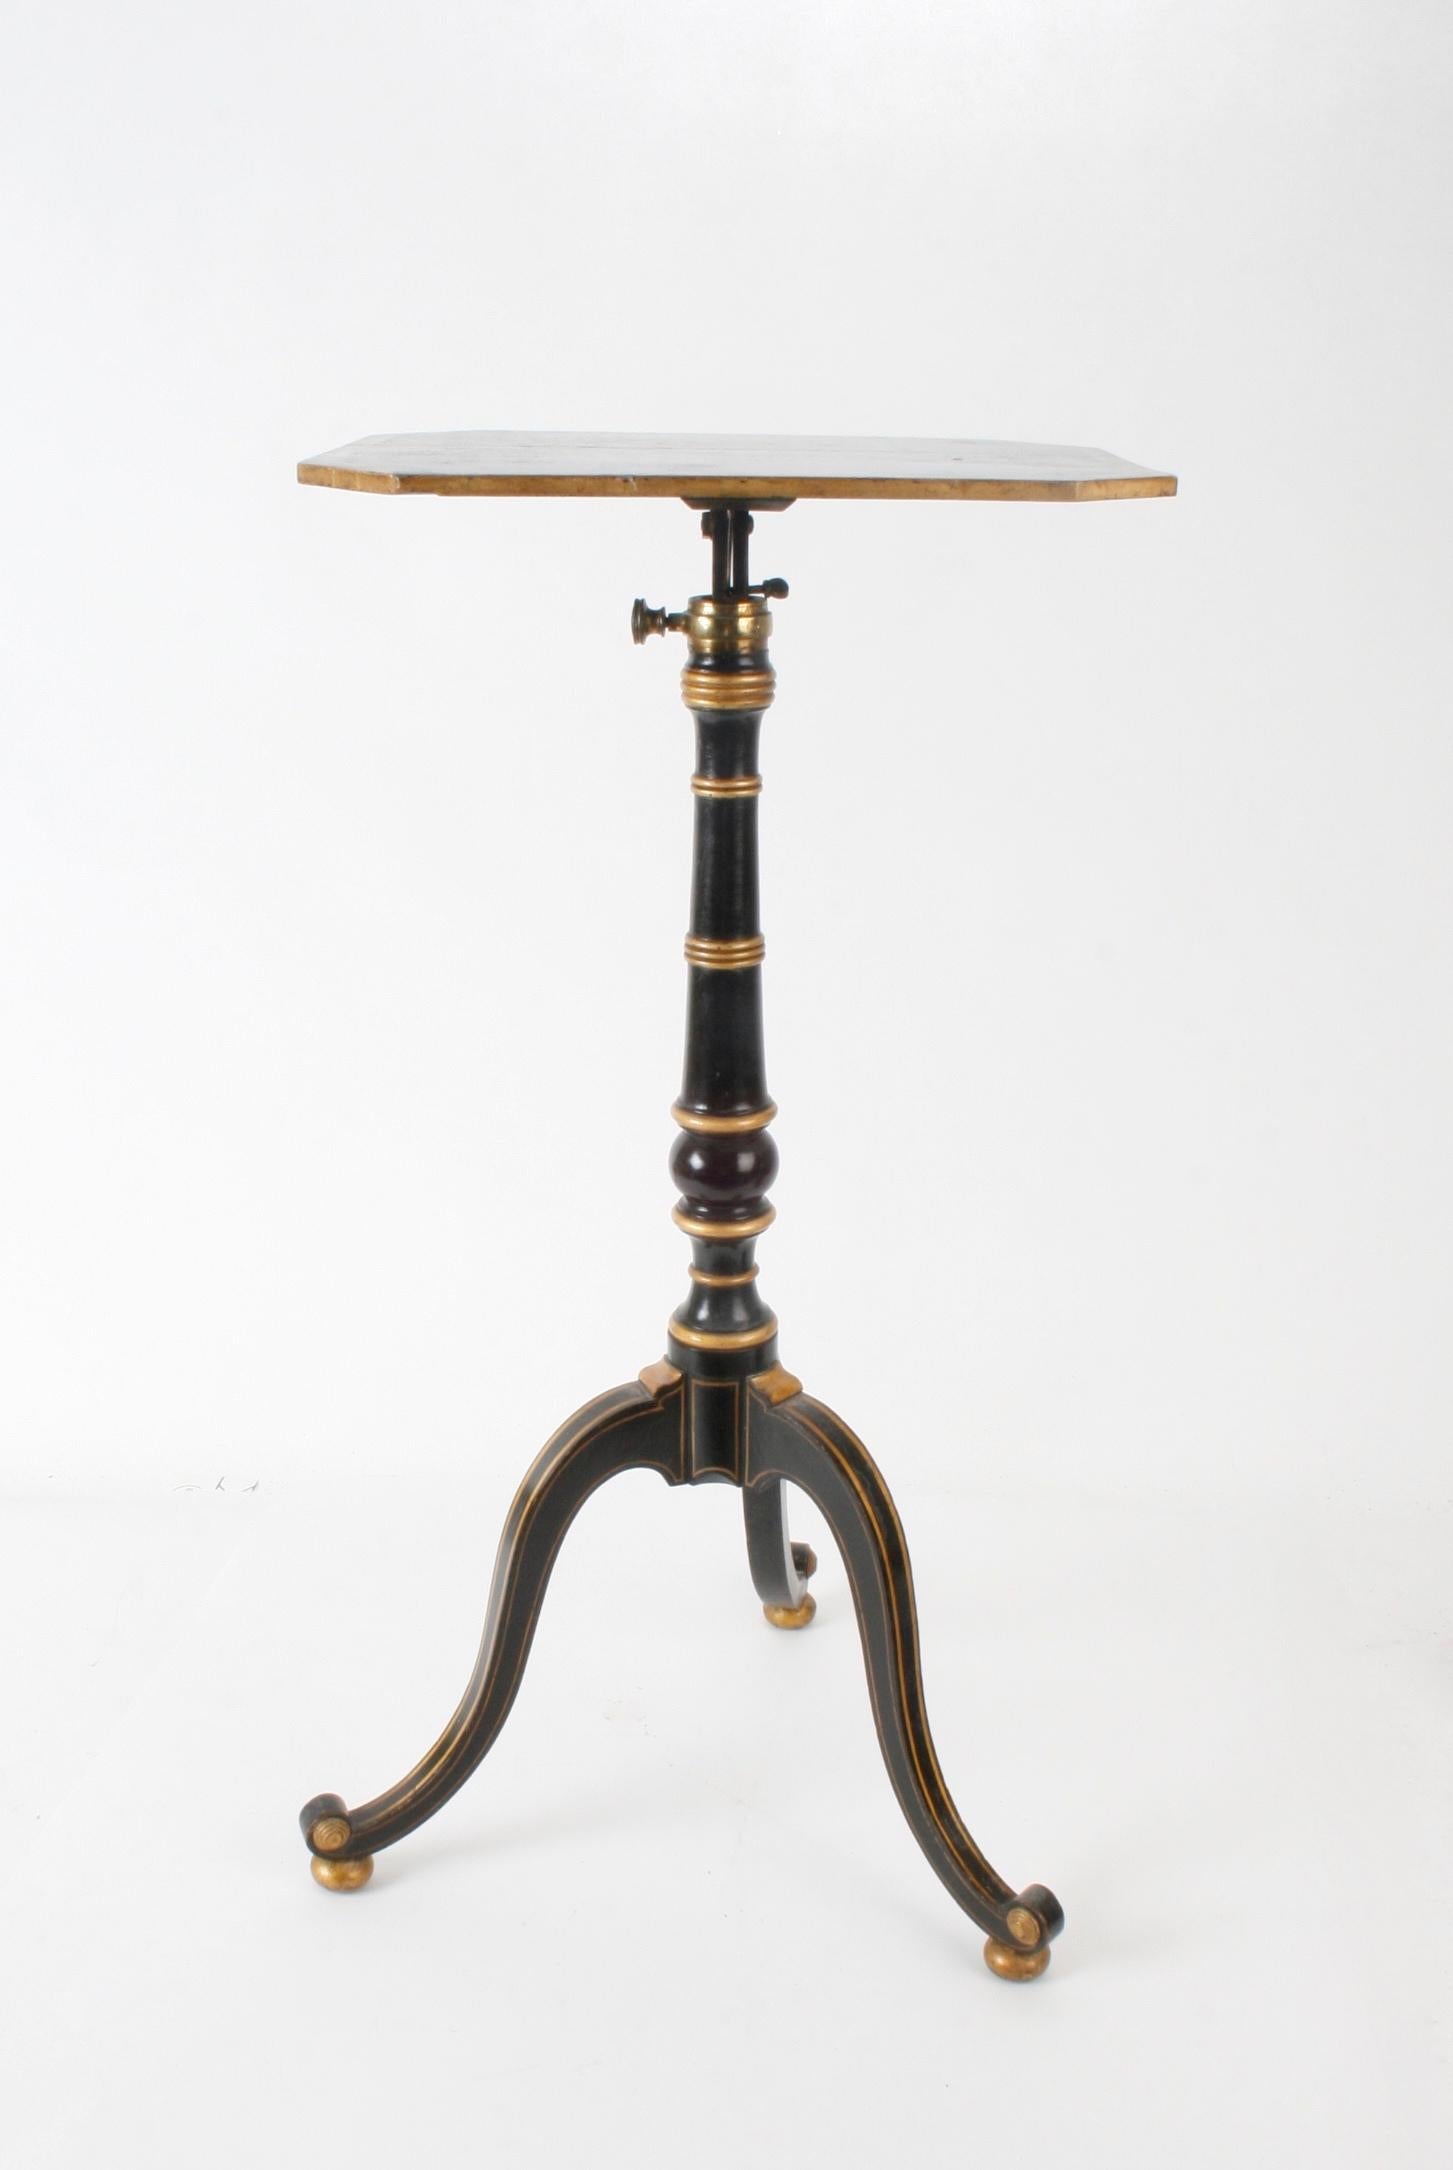 19th Century Regency Chinoiserie and Parcel-Gilt Decorated Telescoping Tilt-Top Table